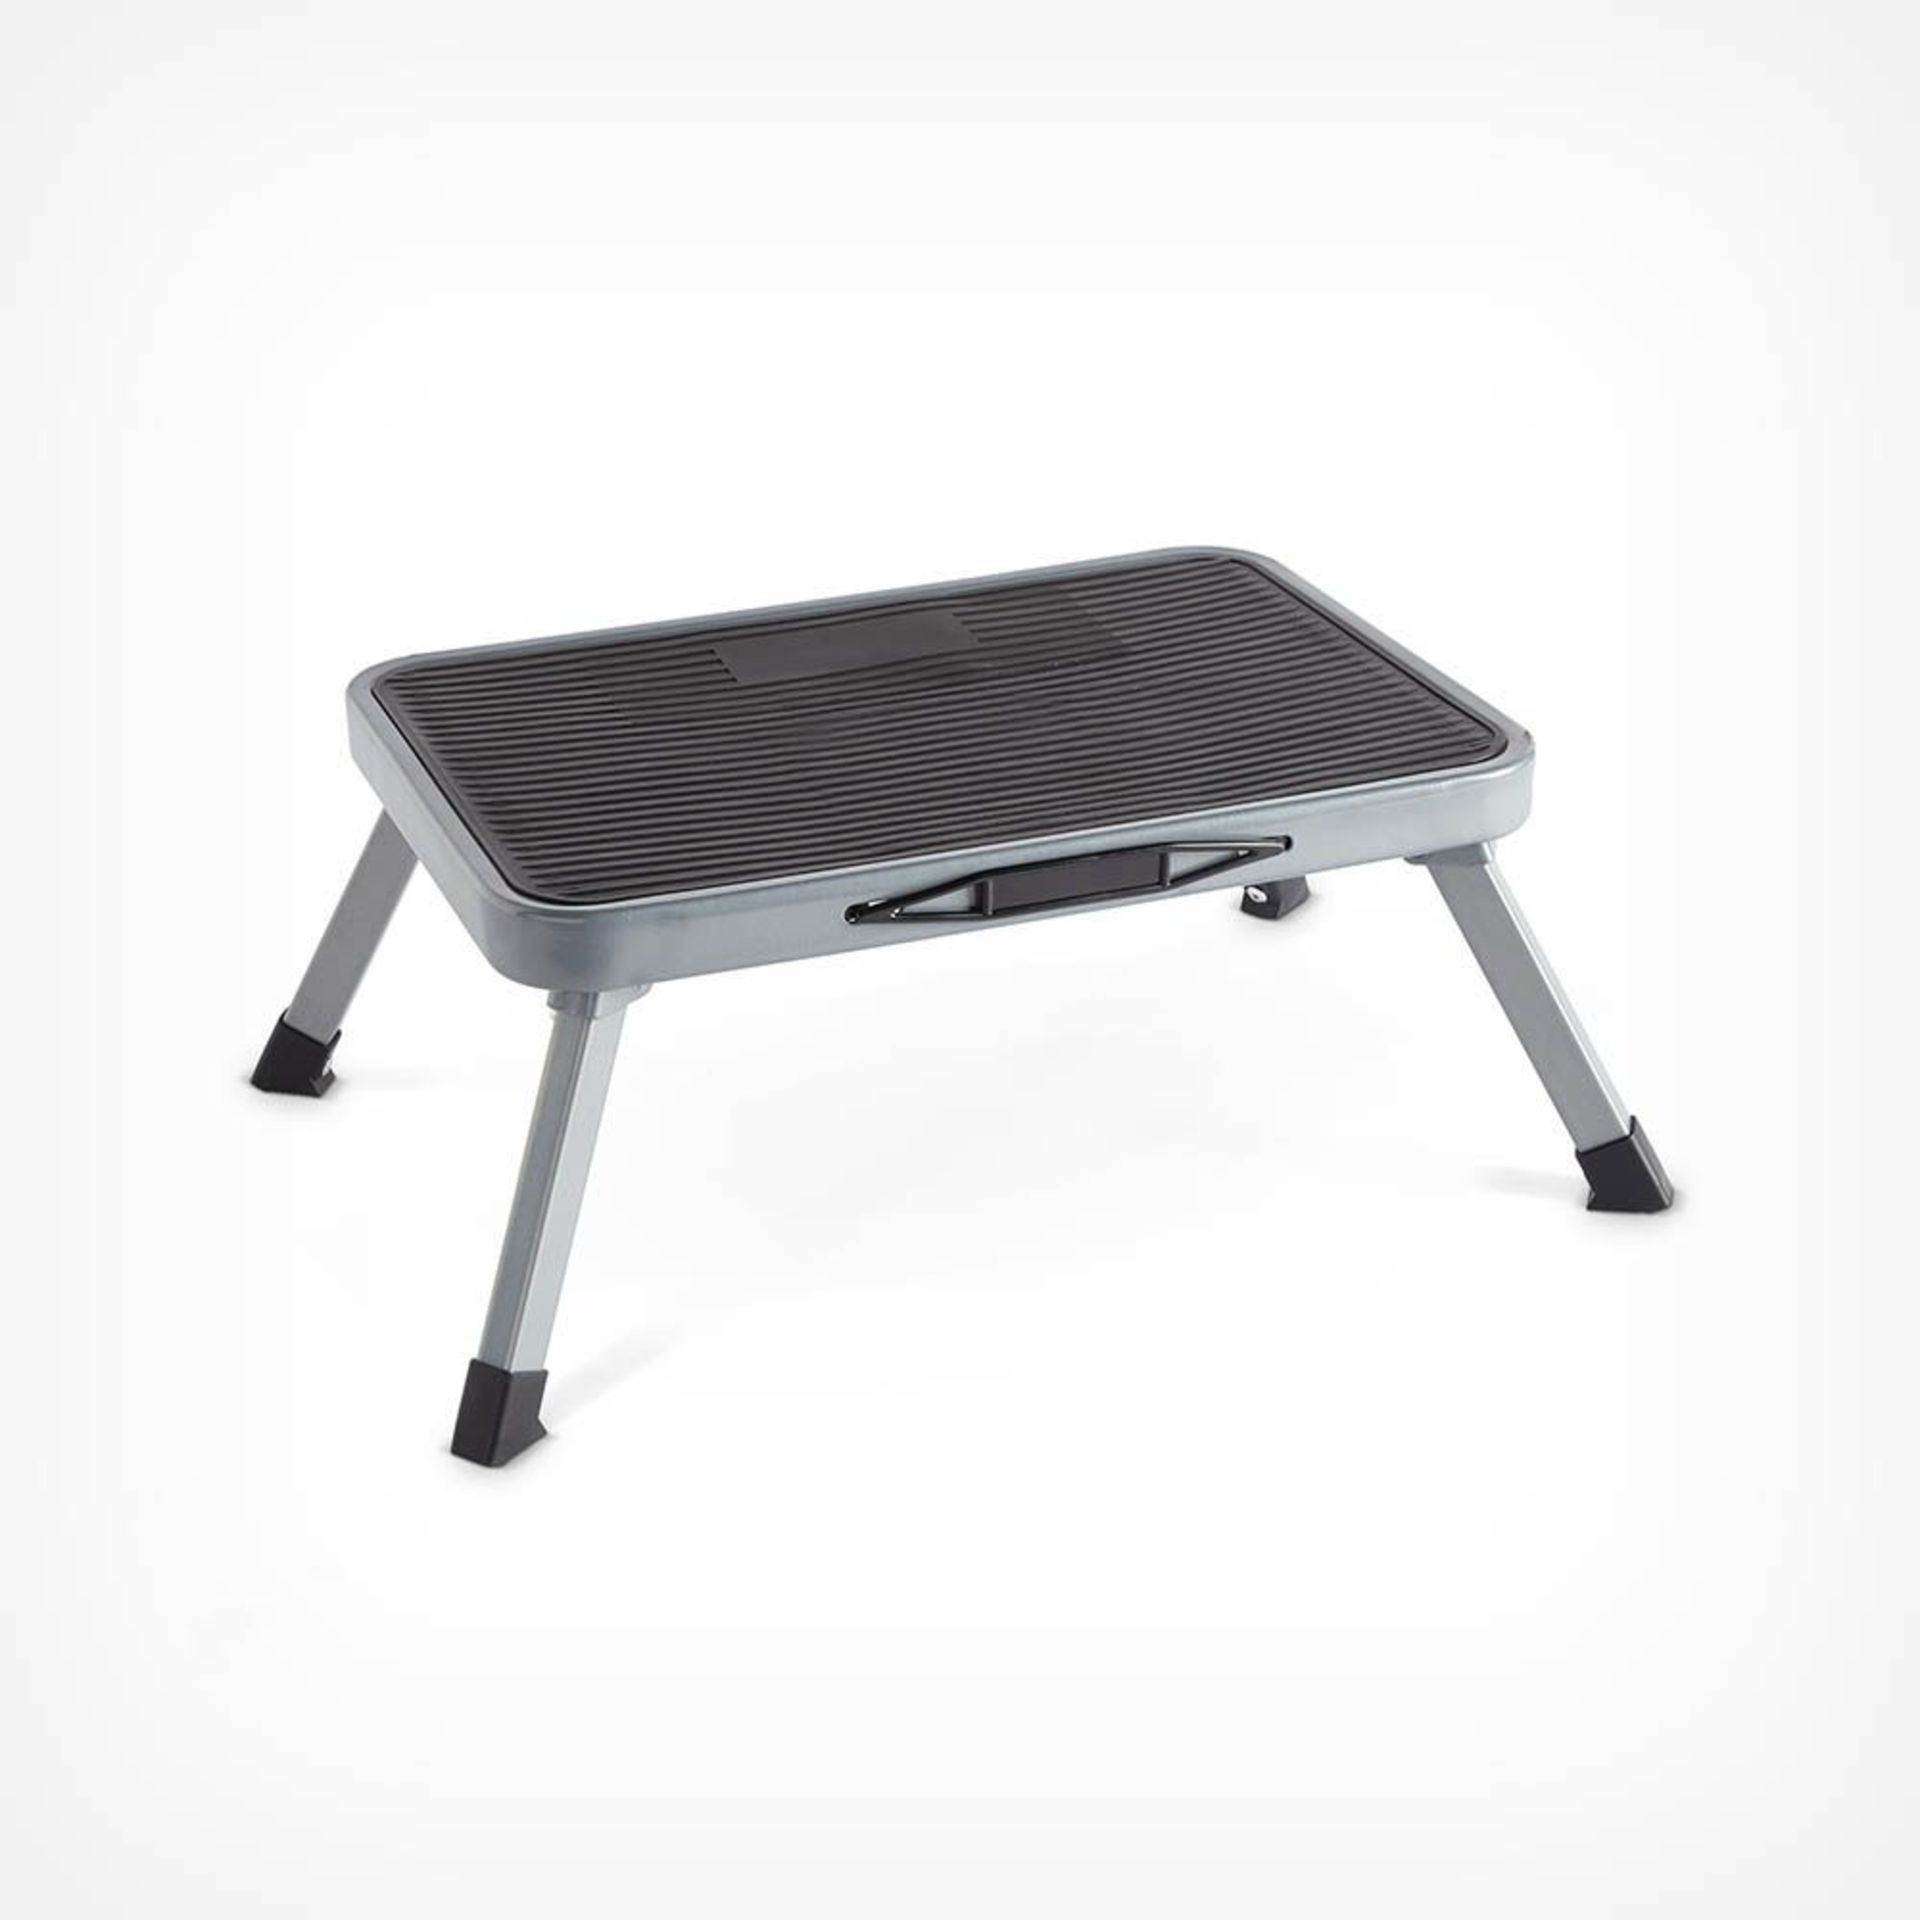 Folding Step Stool. - R8. Combining usability with durability, this step stool is a perfect fit